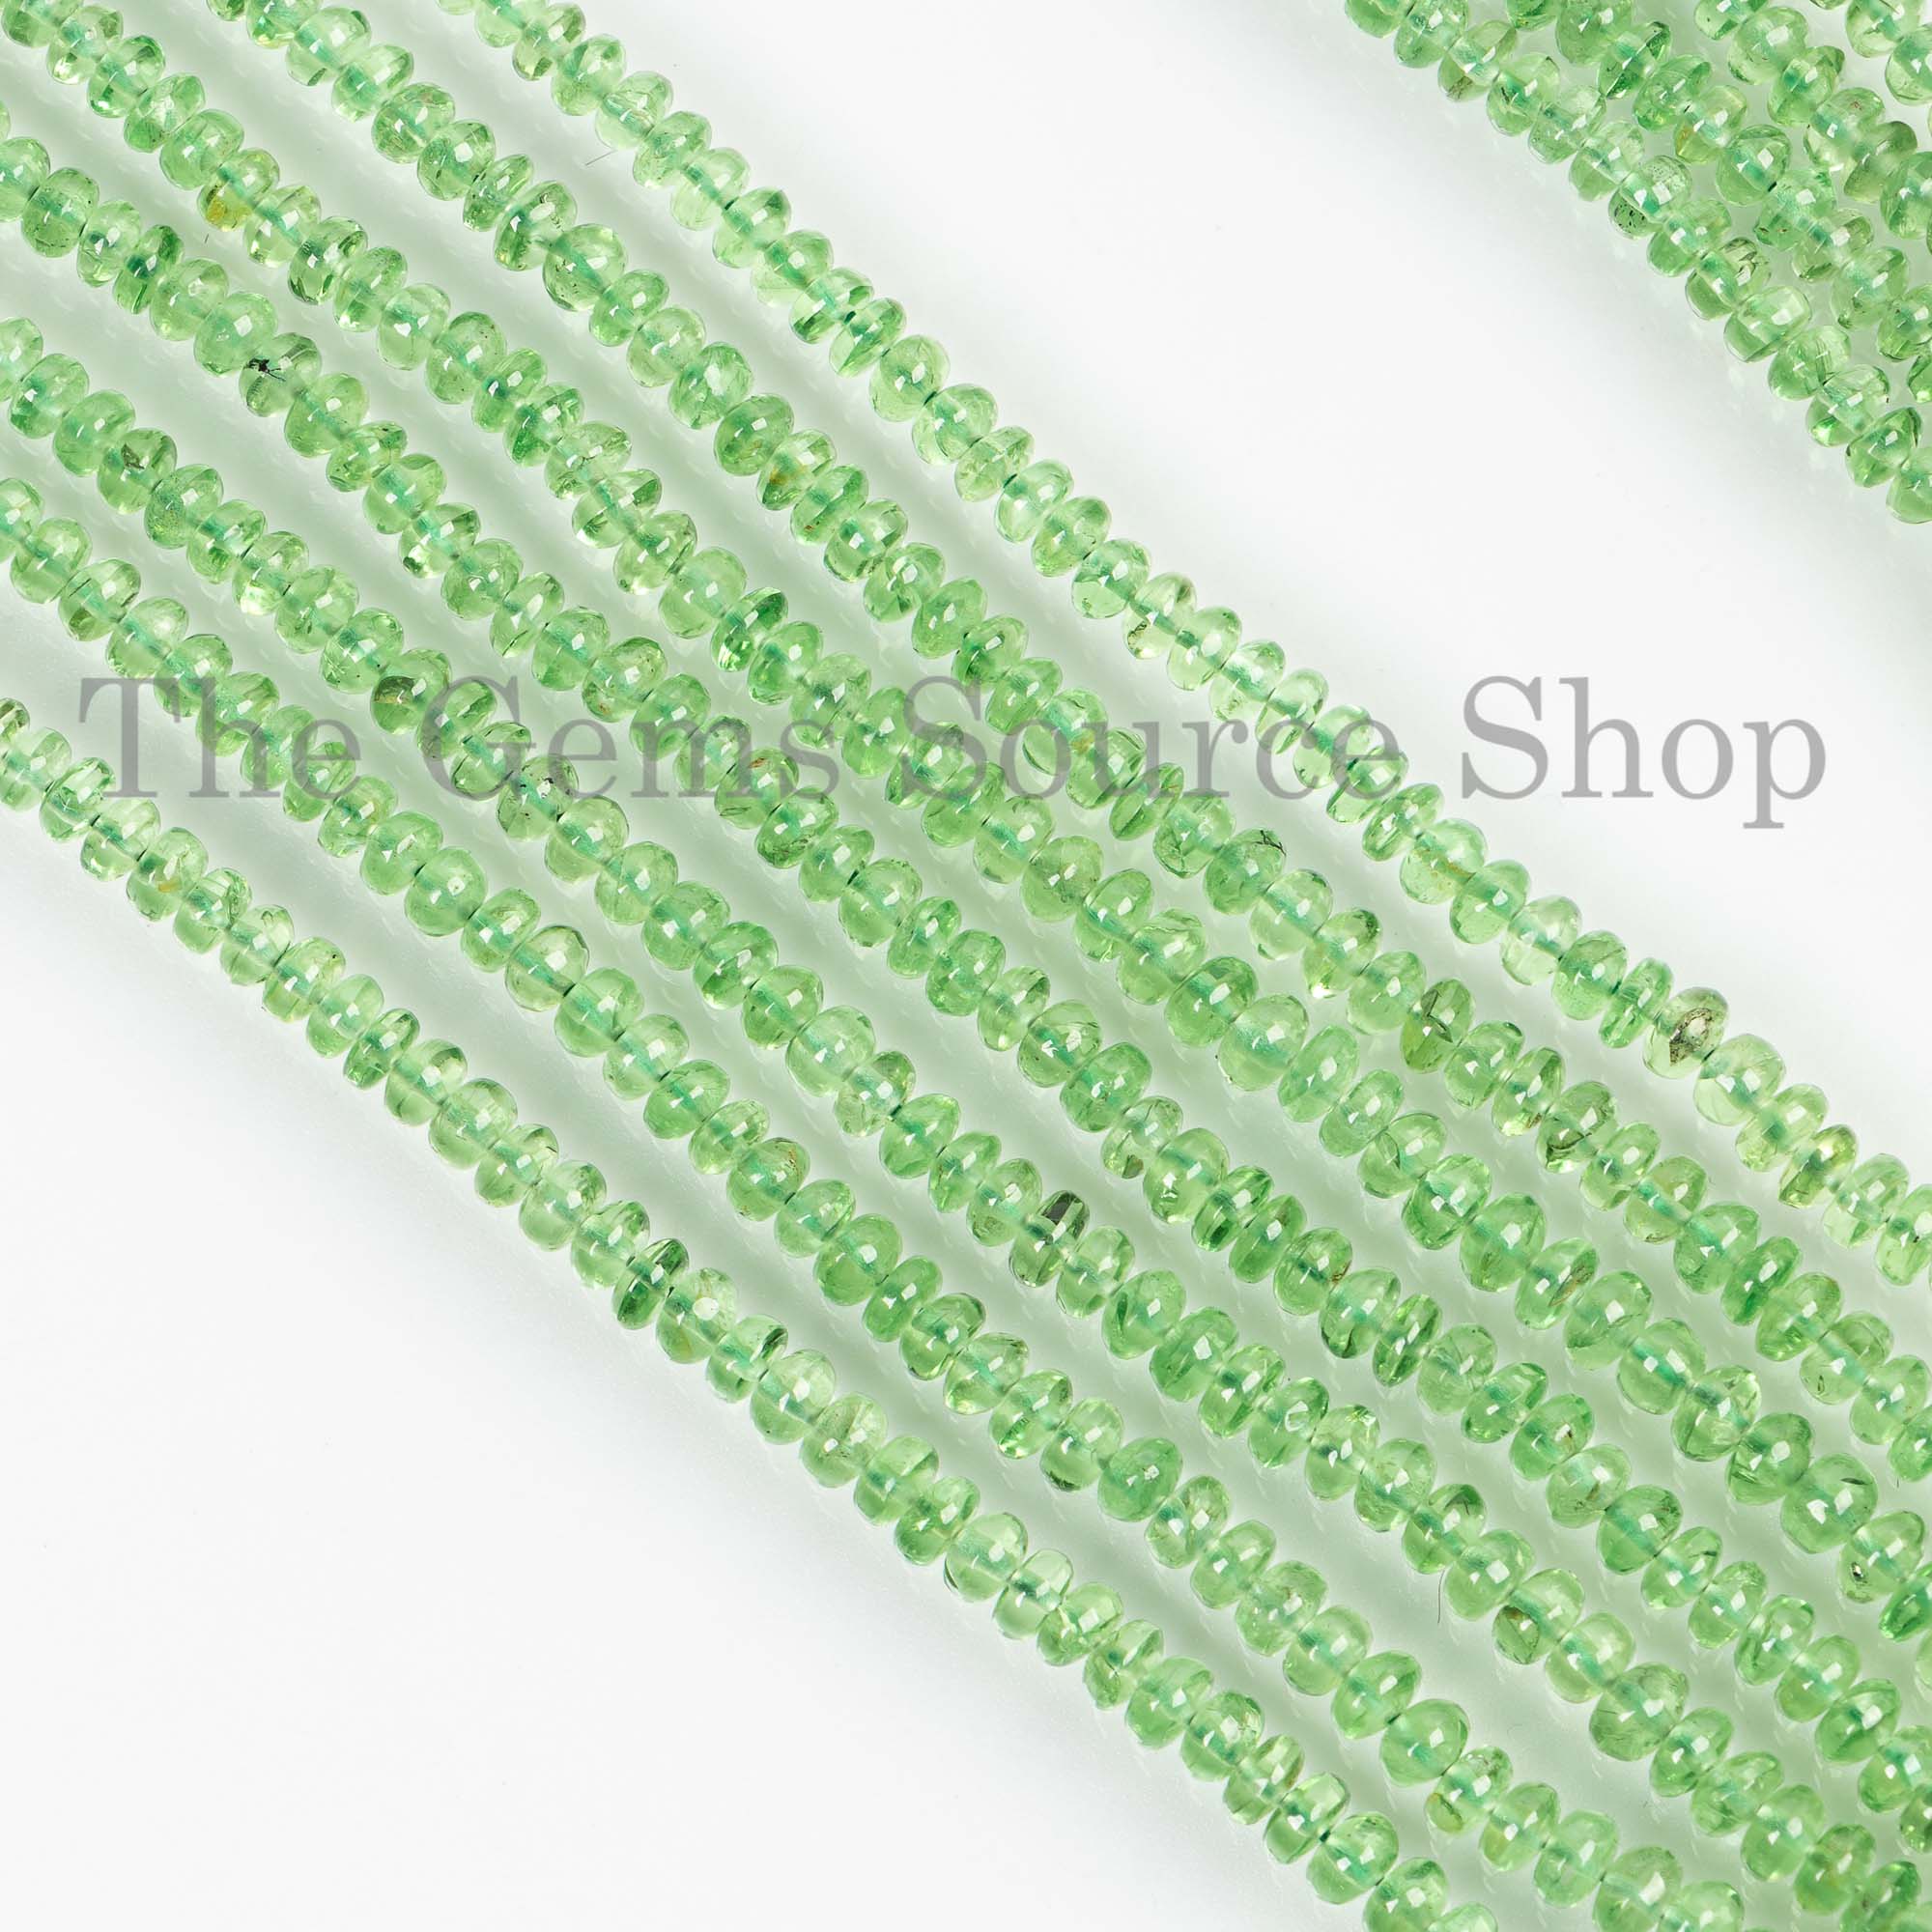 High Quality Tsavorite Rondelle Beads, 3-5mm Tsavorite Beads, Tsavorite Plain Rondelle Beads, Tsavorite Smooth Beads, Beads For Jewelry